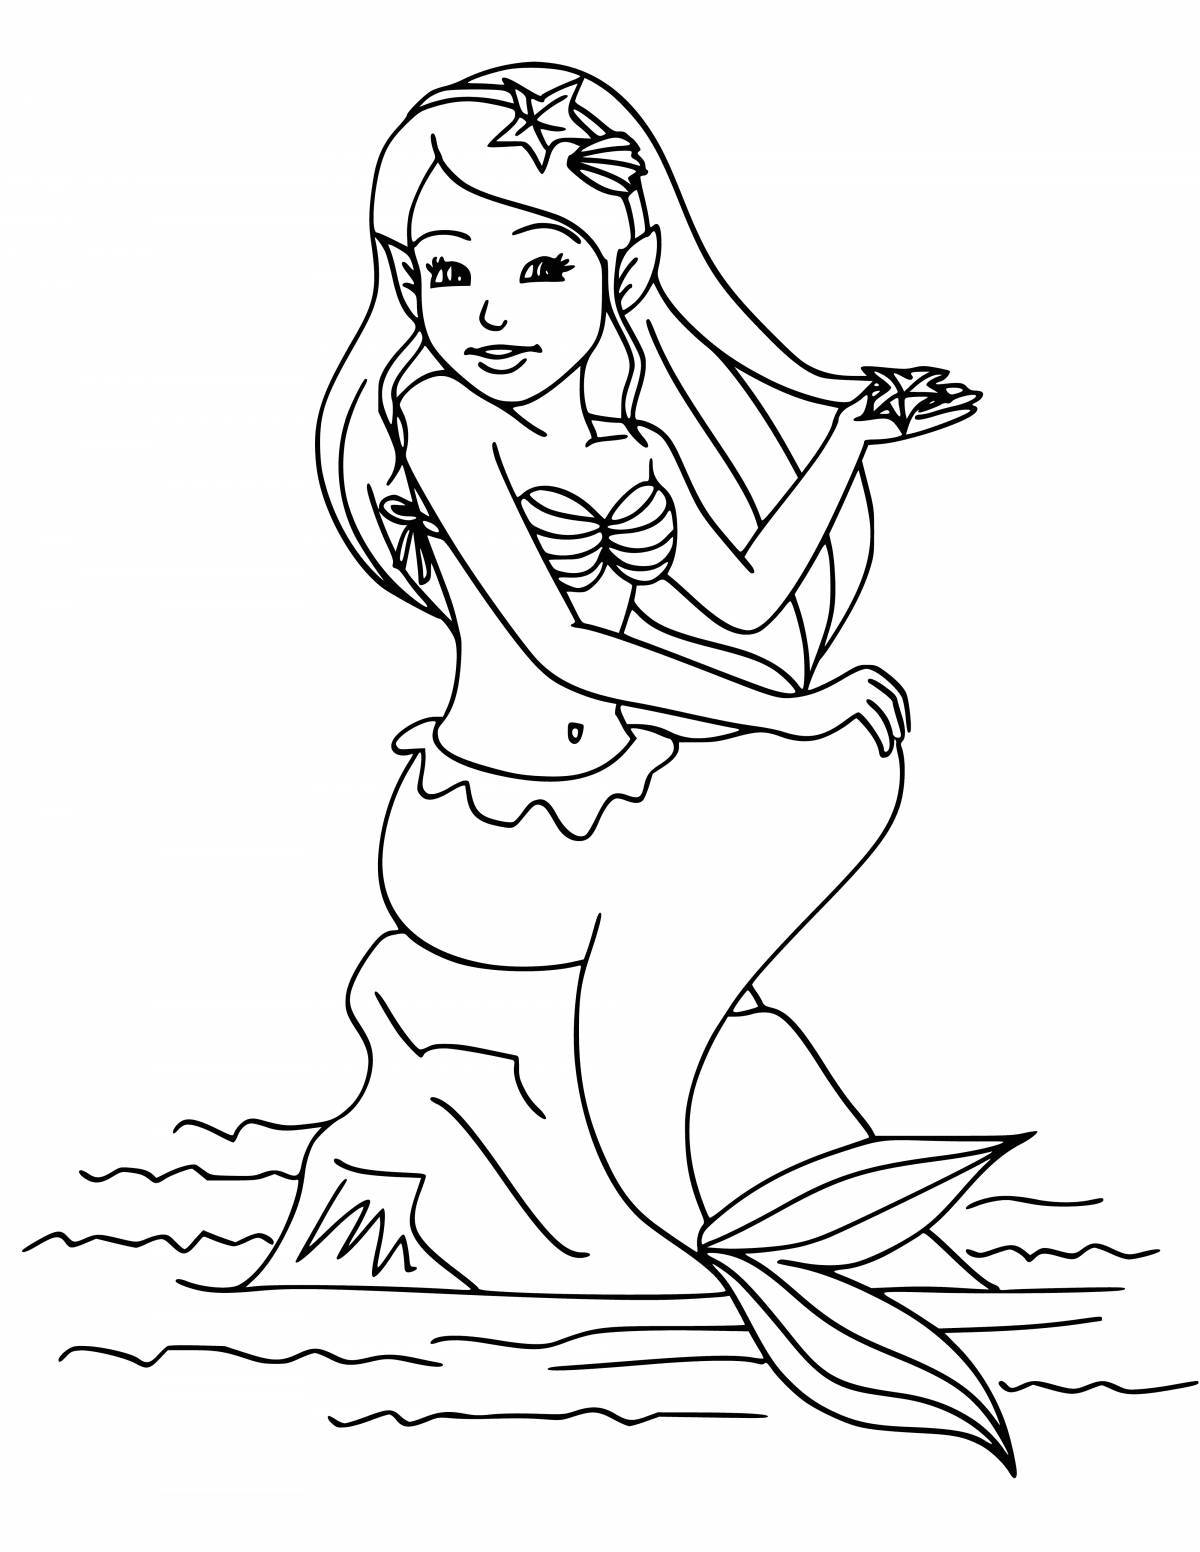 Colorful little mermaid coloring book for kids